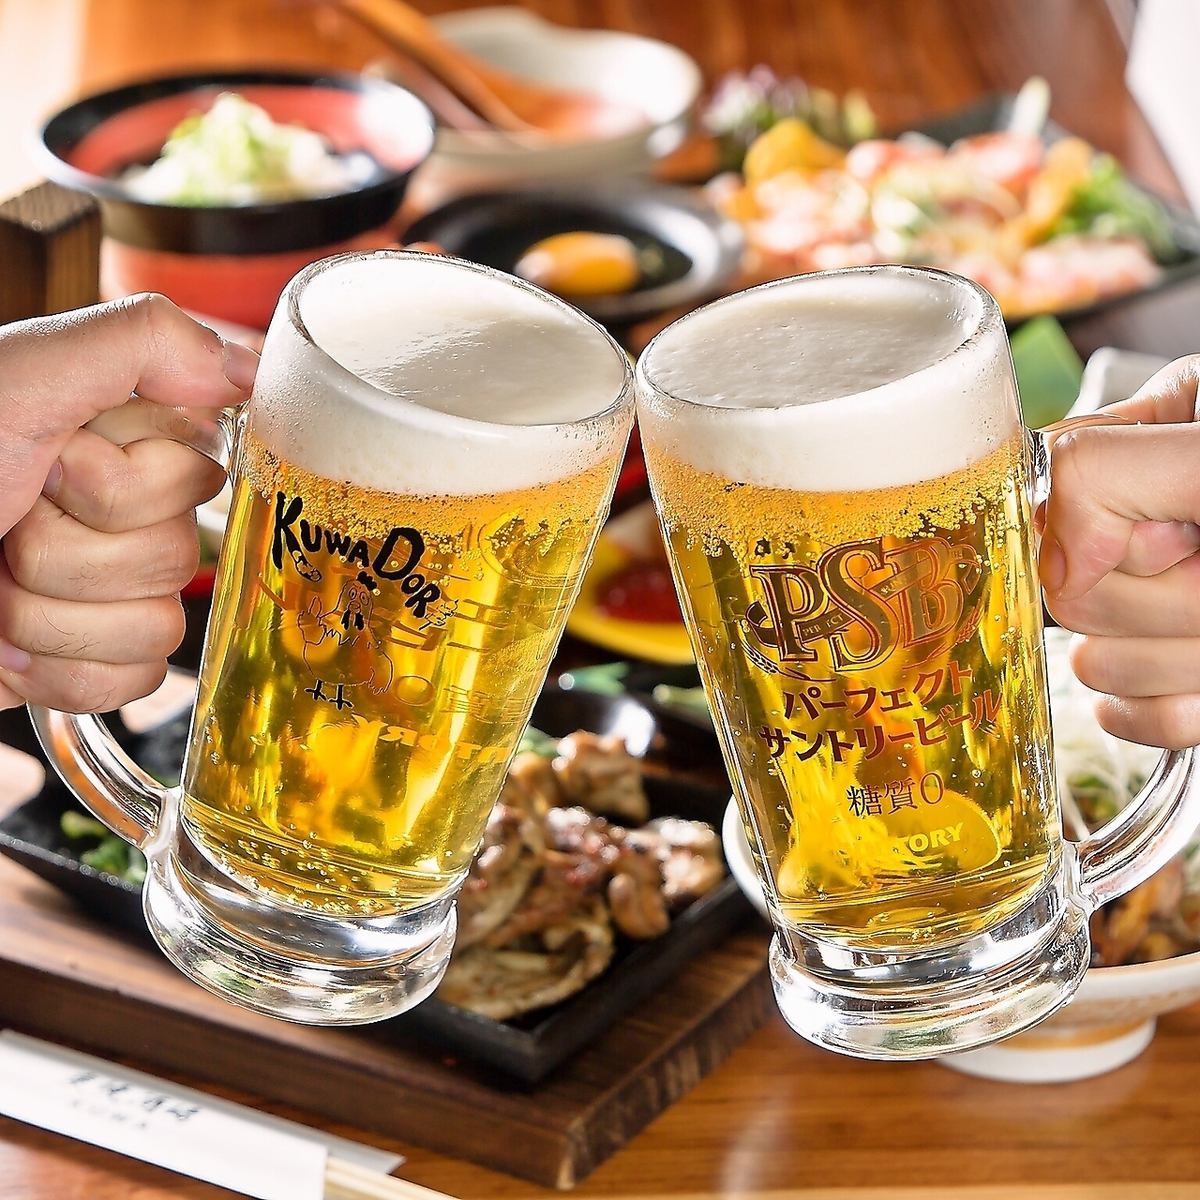 Courses starting from 1 person◎Various banquets◎All-you-can-drink courses starting from 2,500 yen!Enjoy at a reasonable price!!